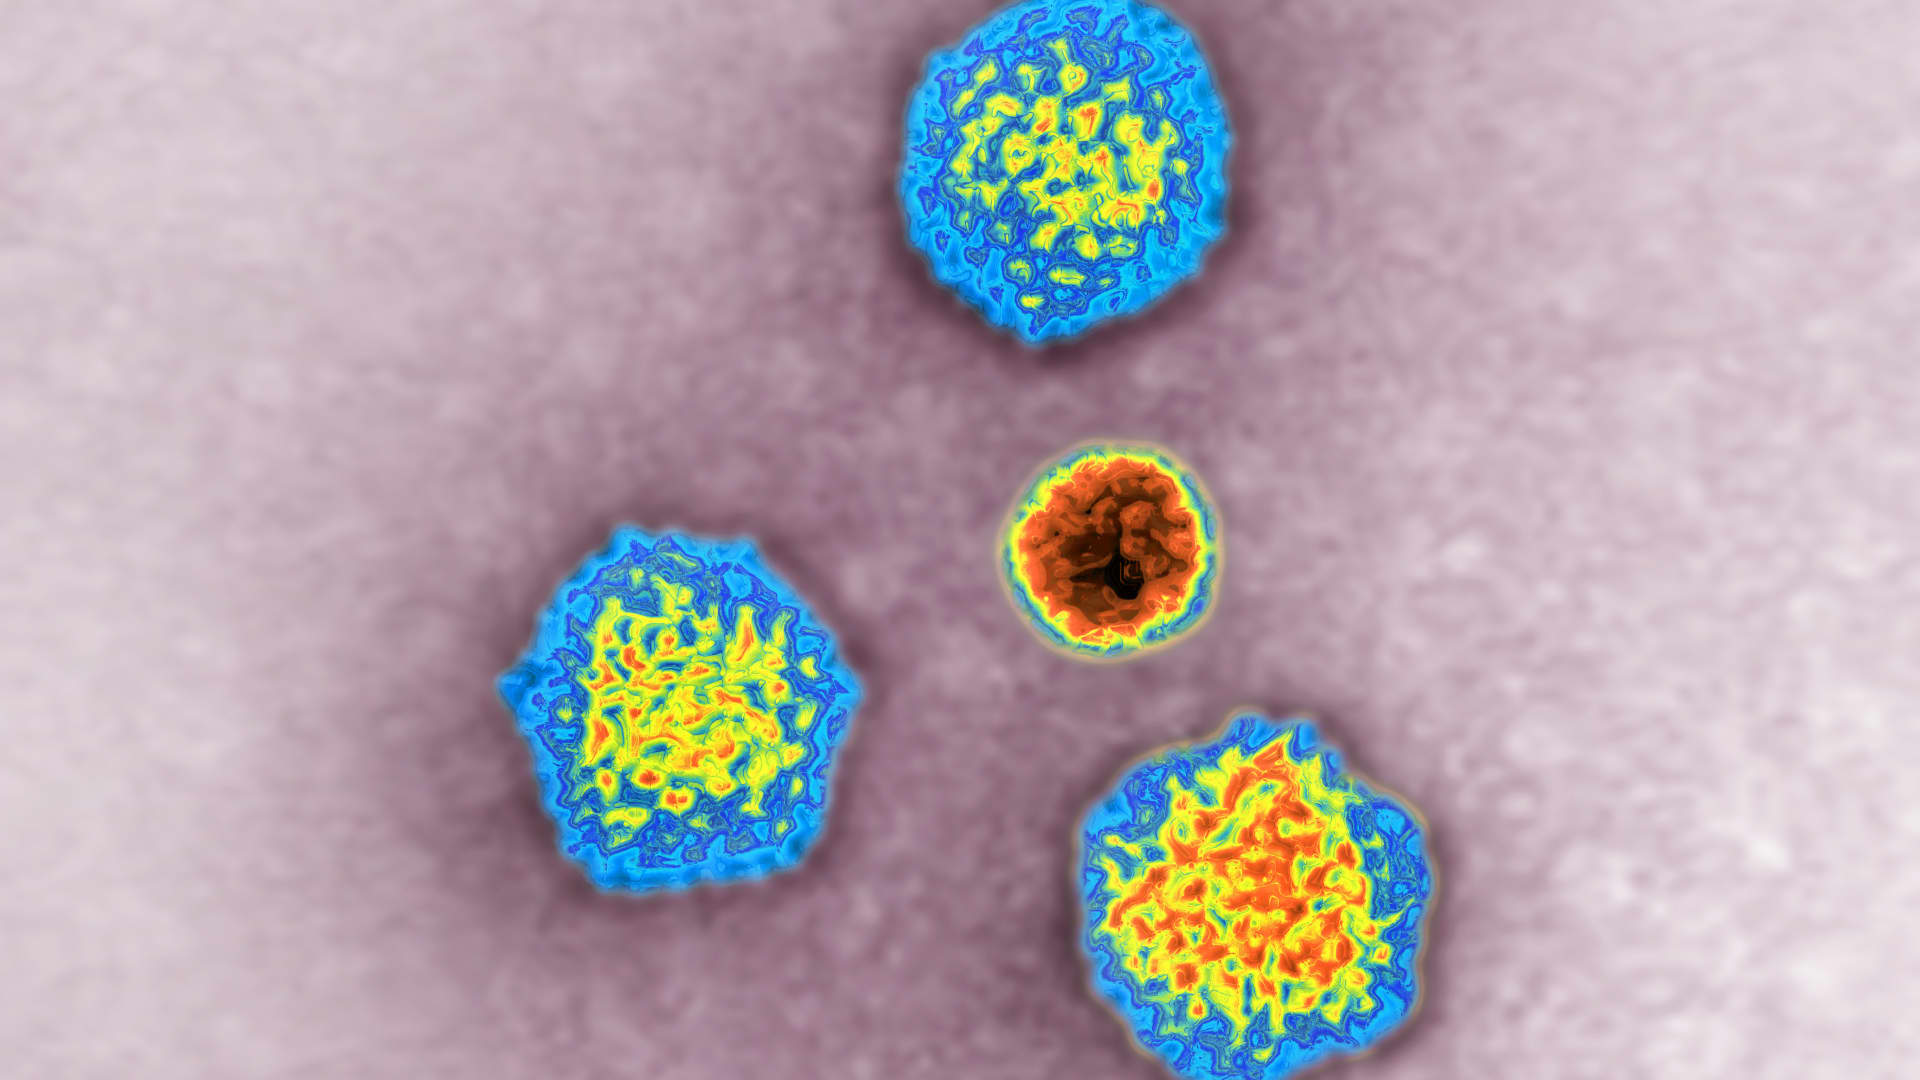 Hepatitis outbreak in children is also related to adenovirus, WHO says